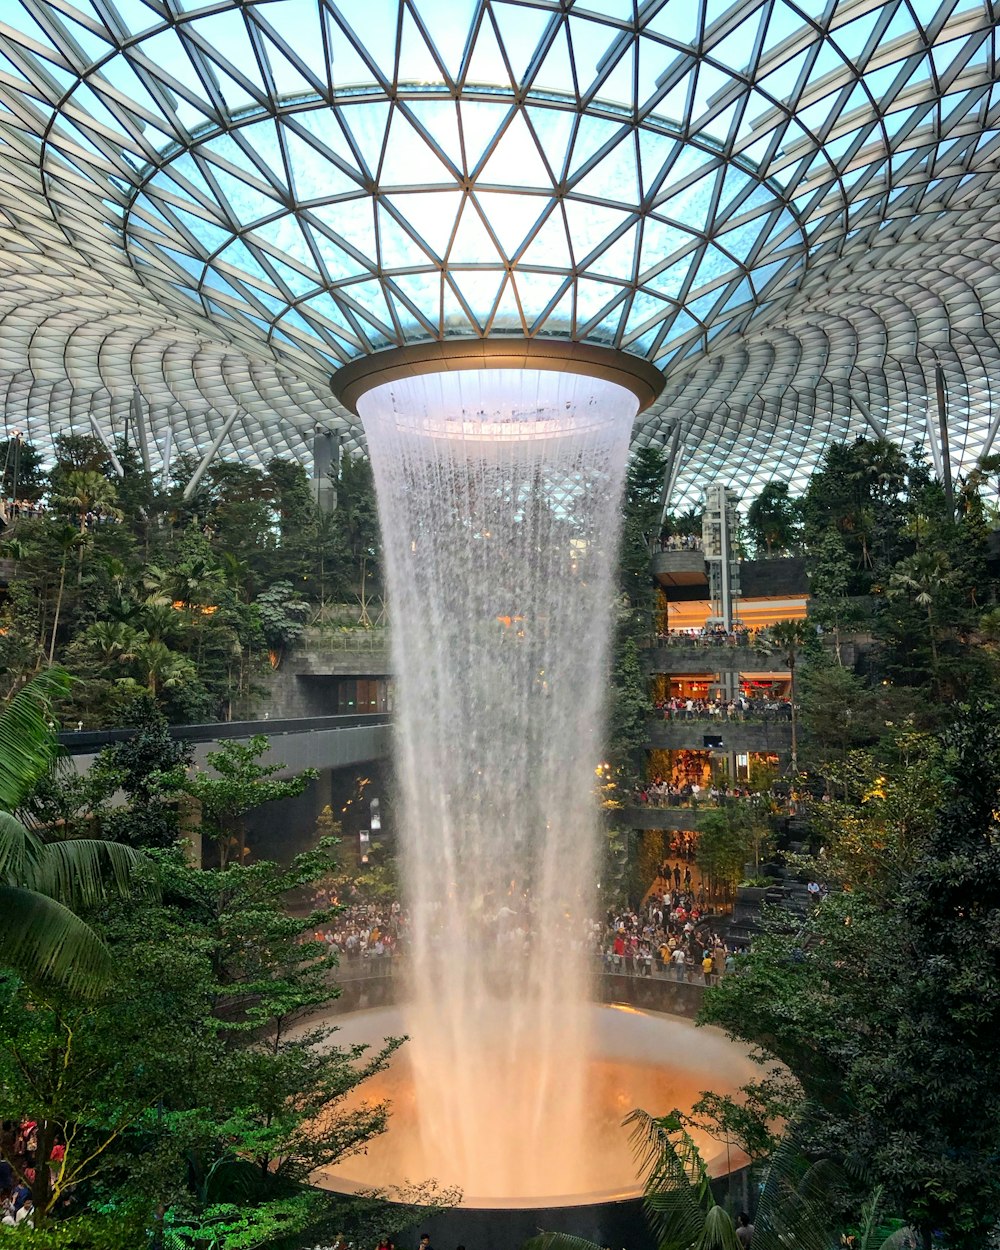 water fountain surrounded by trees inside building